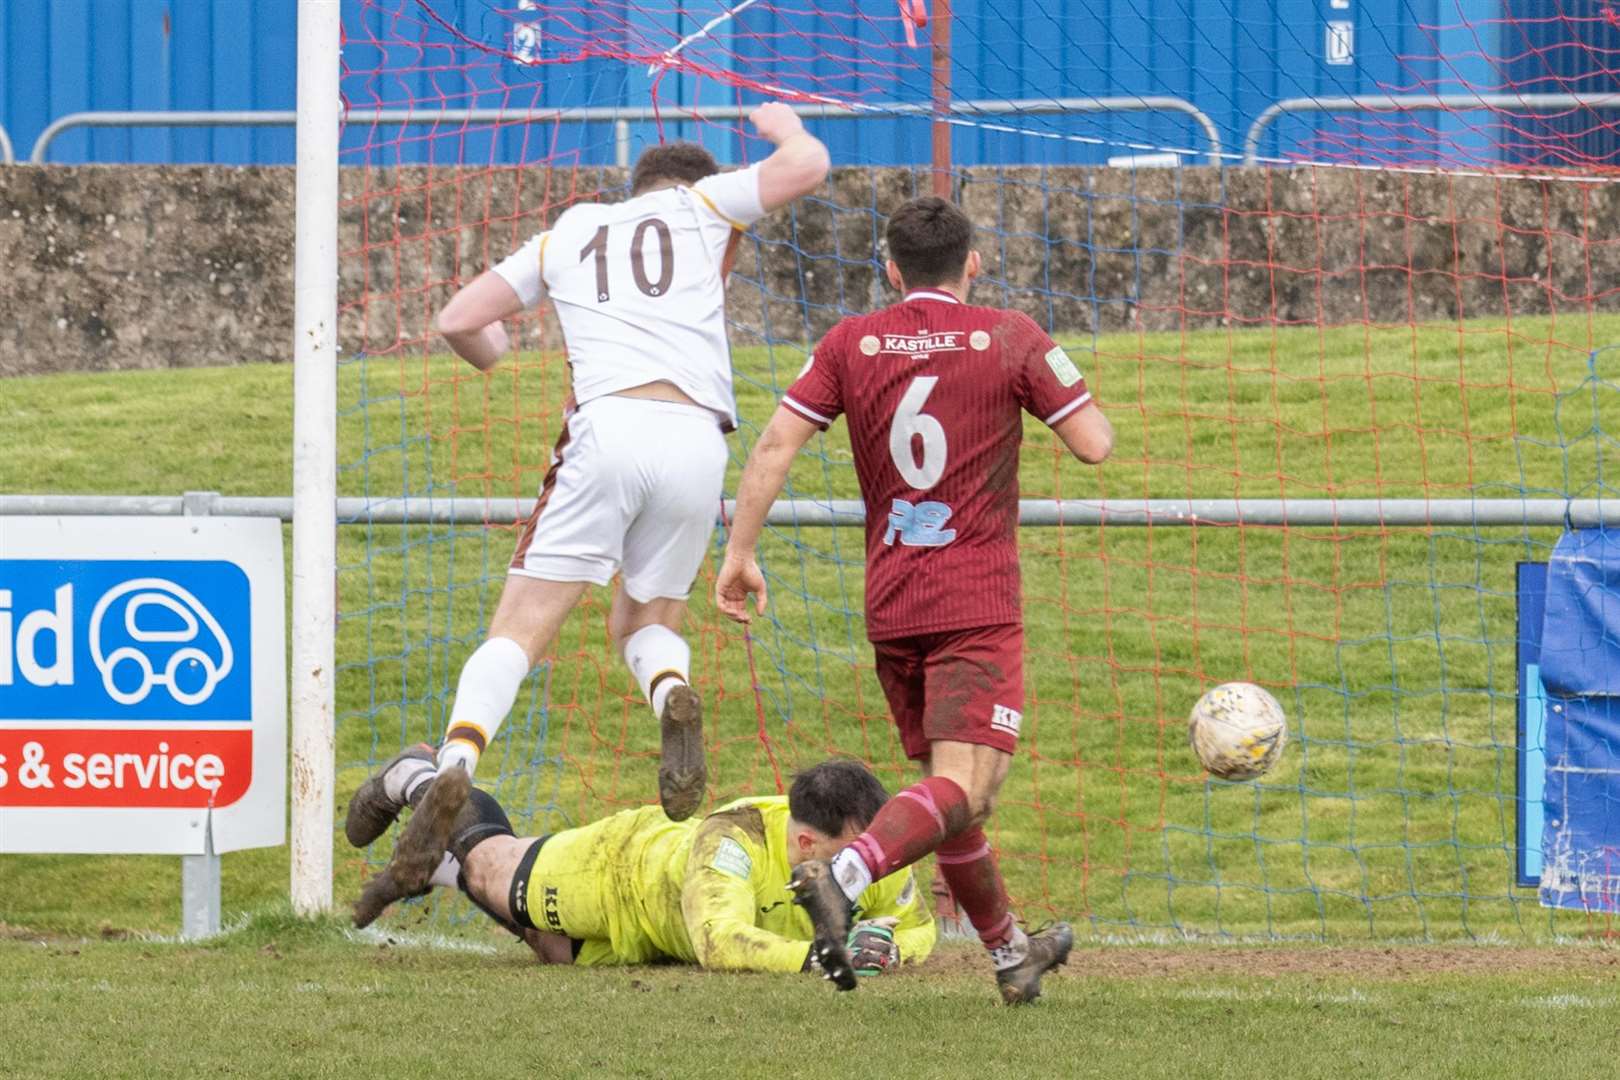 Ben Barron (10) gets the first of his two goals after coming on as Forres sub. Picture: Beth Taylor.